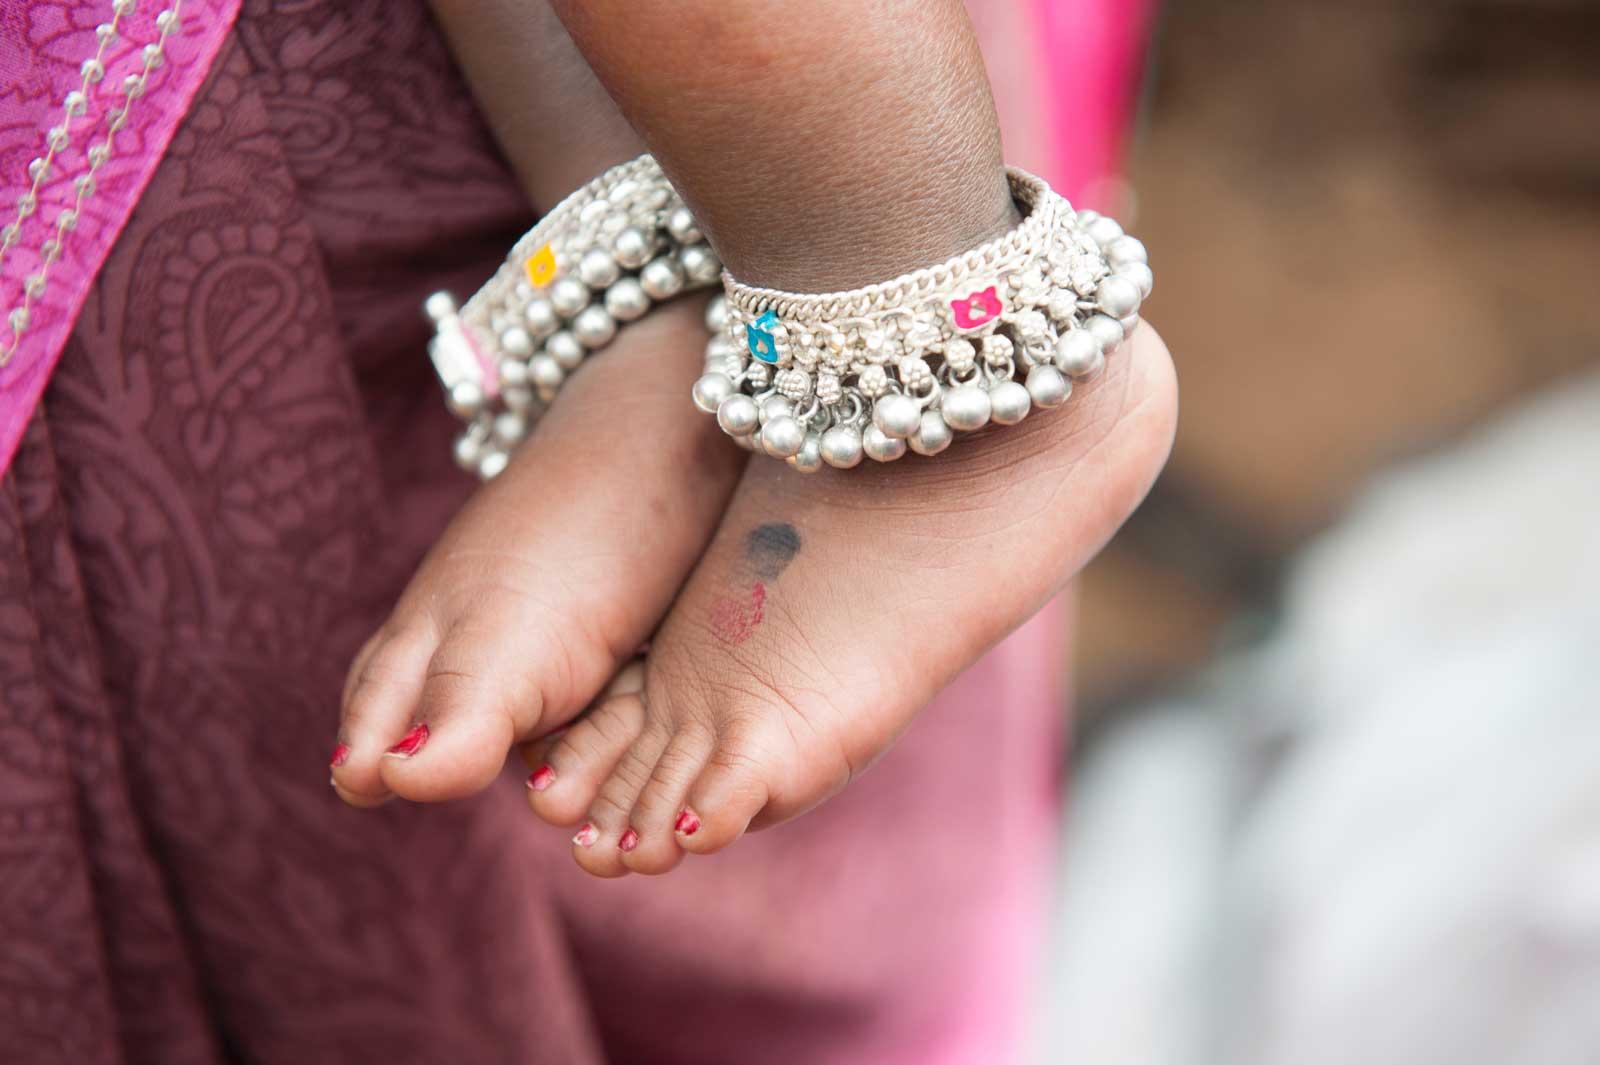 Baby feet with bangles around ancles